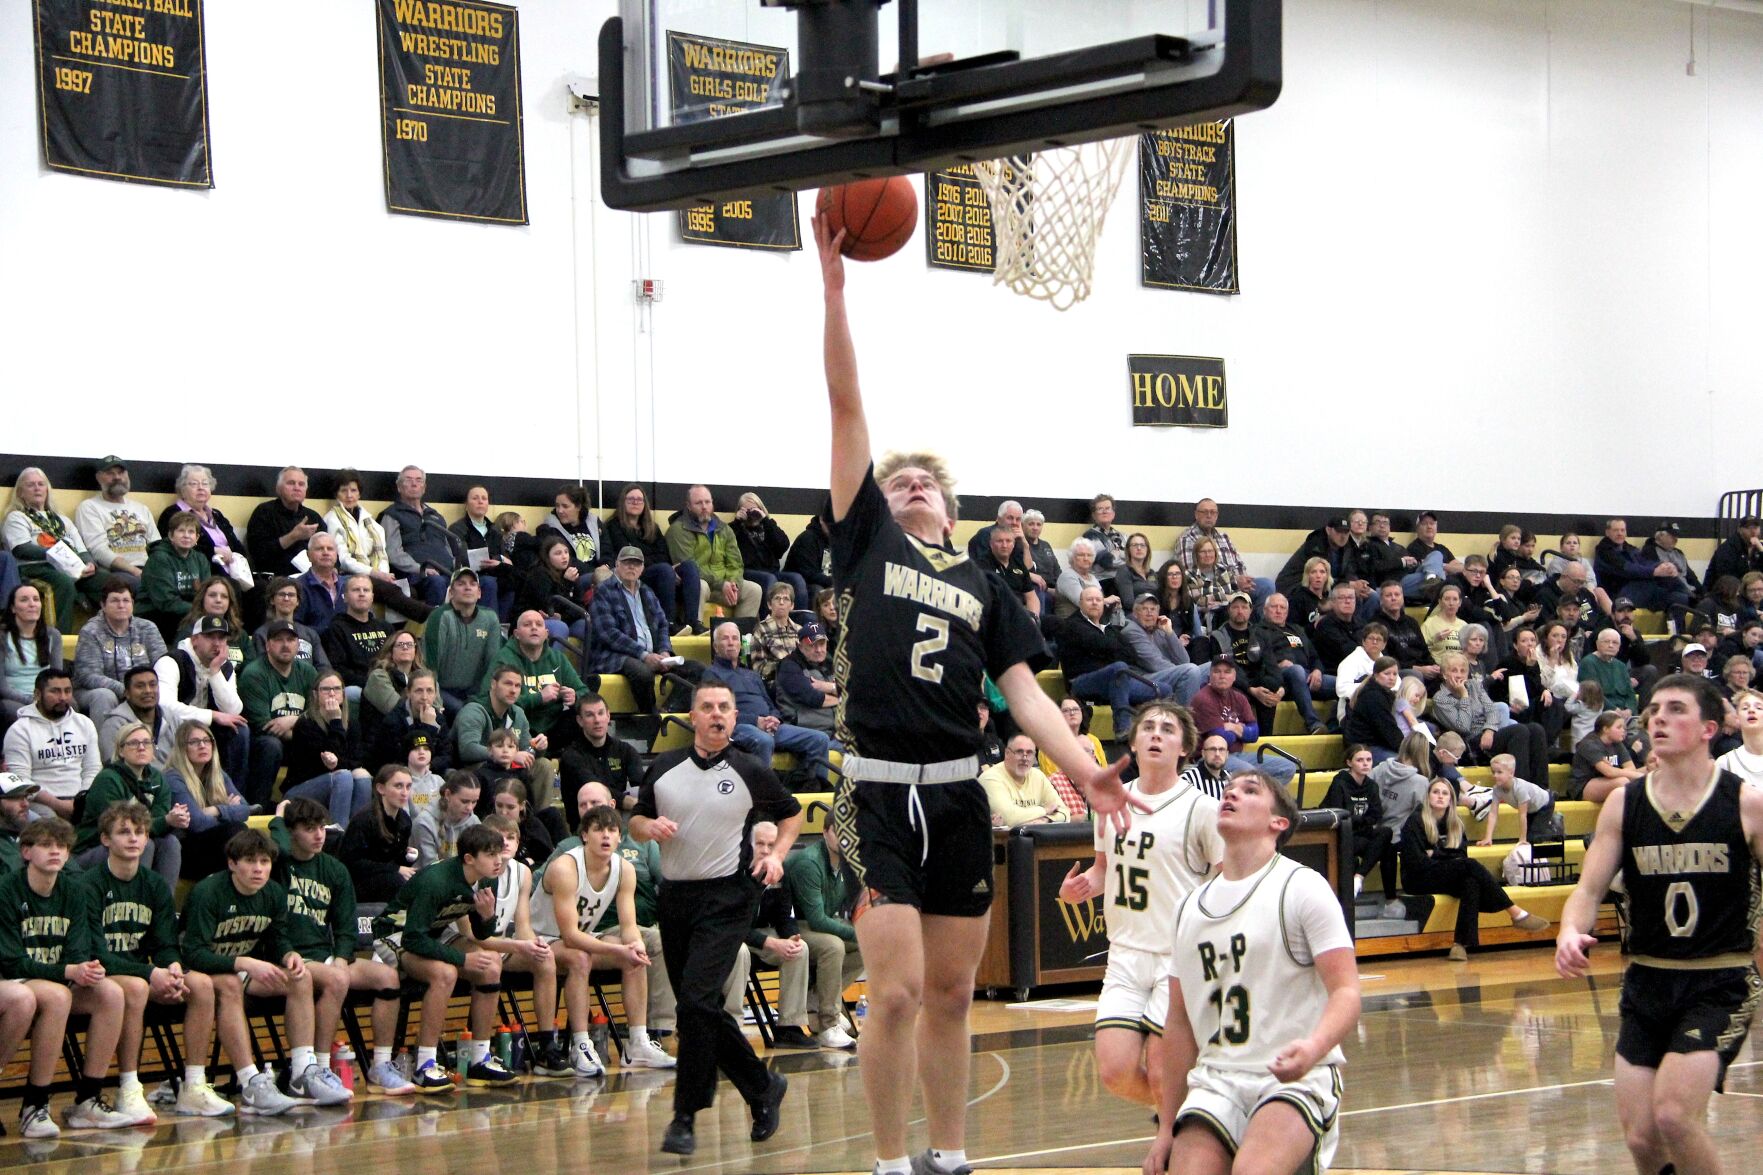 Caledonia Boys Basketball Team Excels with Victories over Rushford-Peterson and Cannon Falls